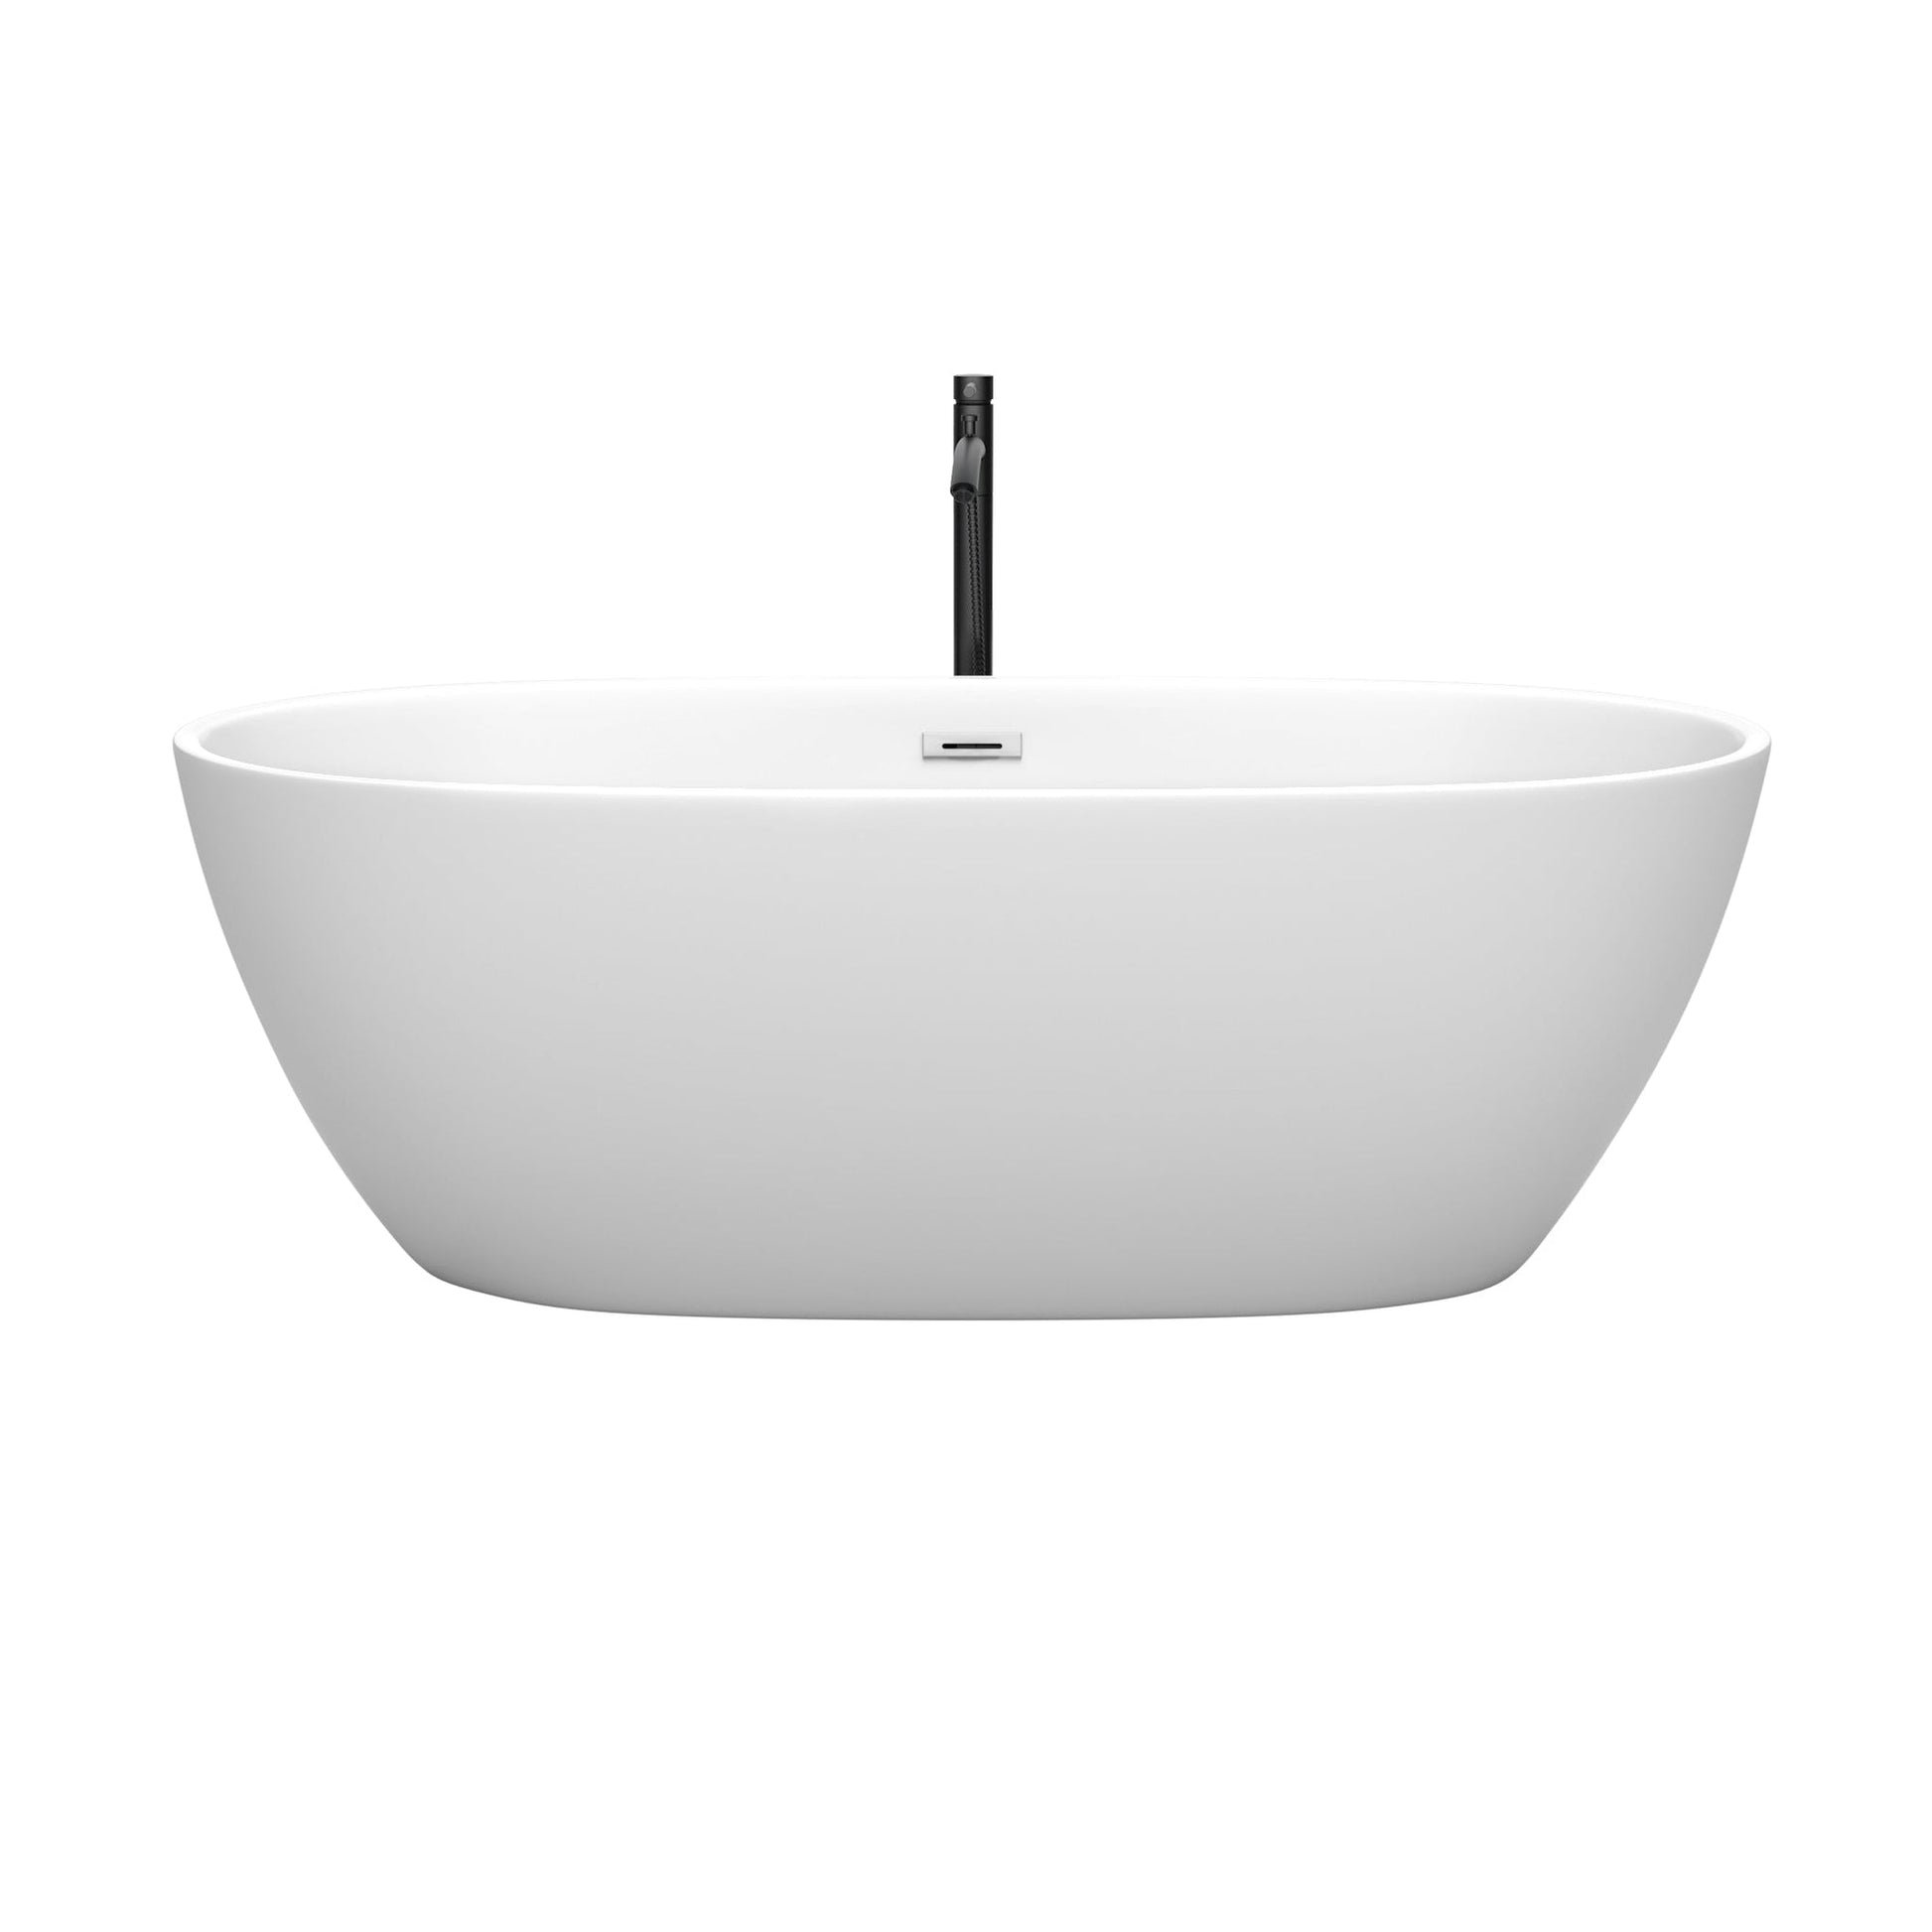 Wyndham Collection Juno 67" Freestanding Bathtub in Matte White With Polished Chrome Trim and Floor Mounted Faucet in Matte Black